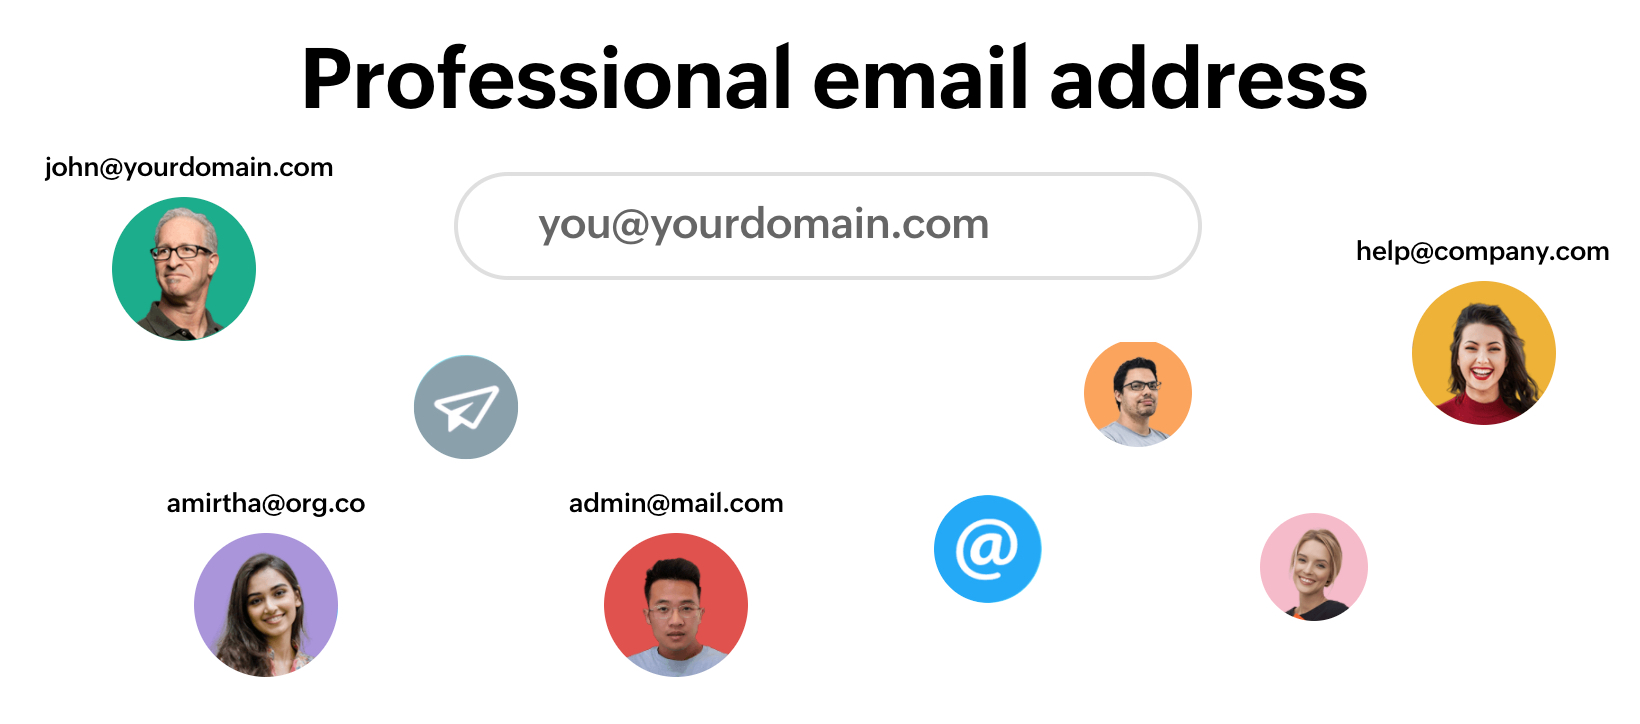 How do I choose a good email domain?